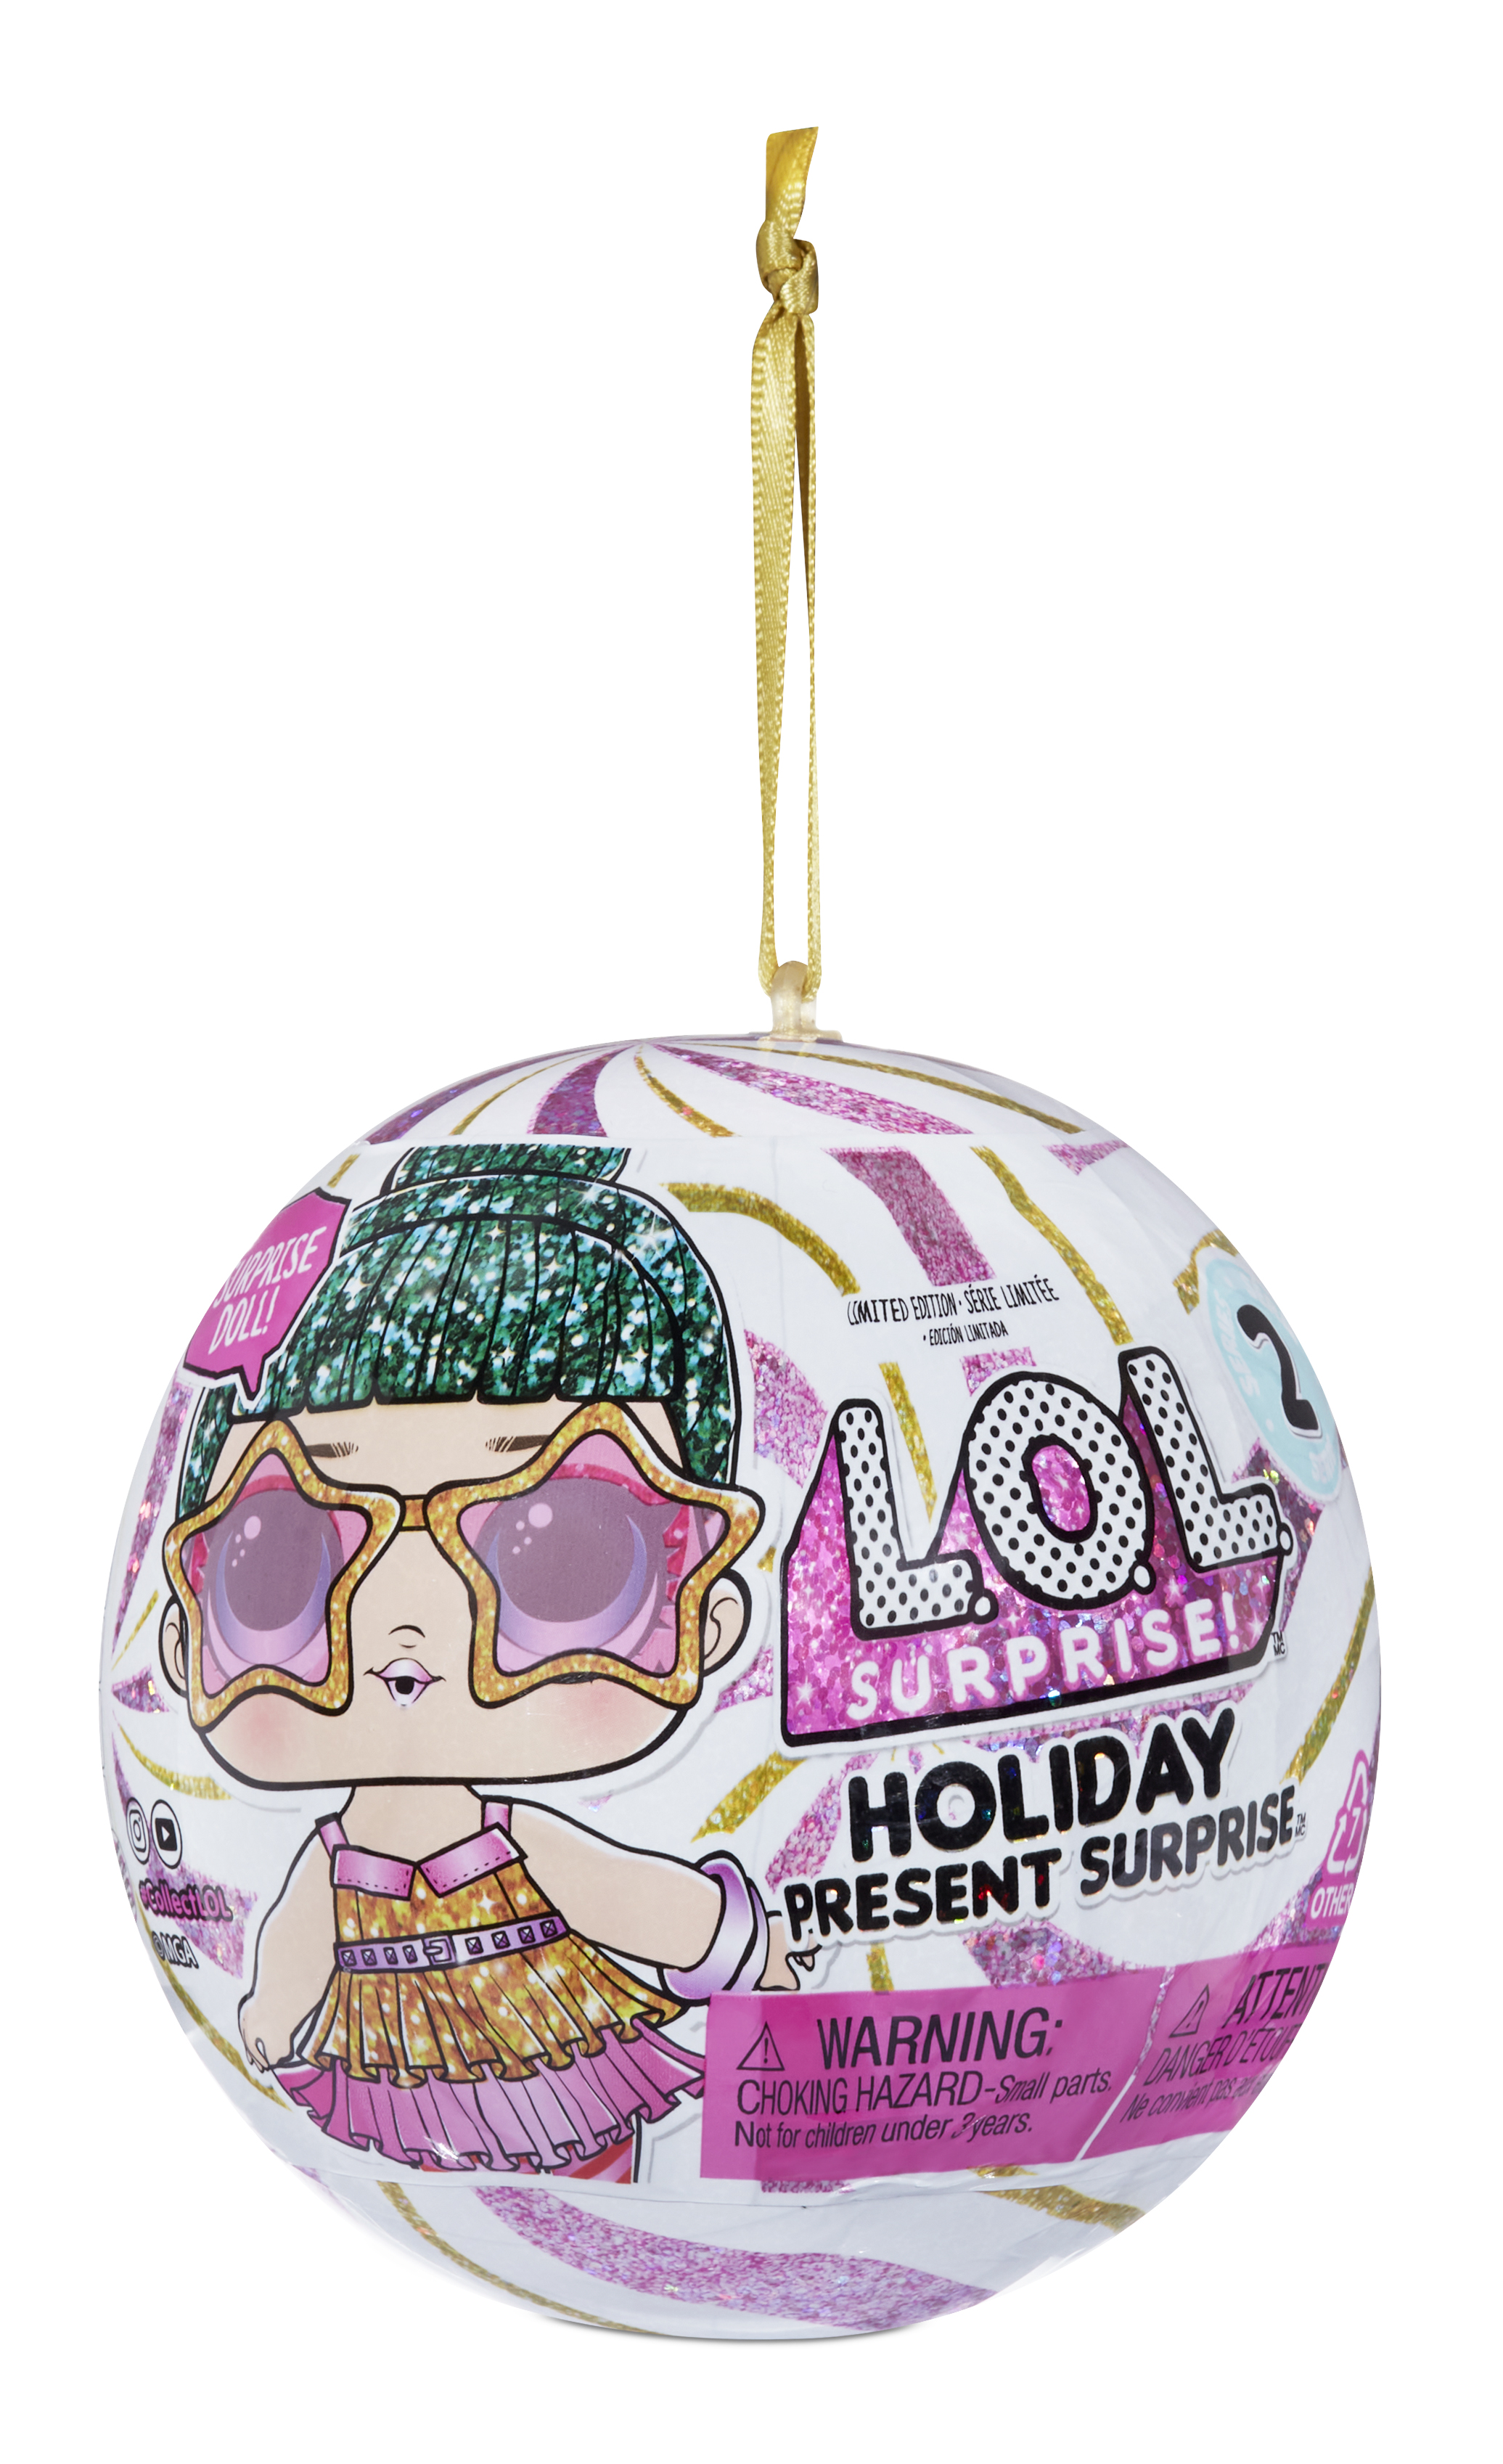 Surprise Holiday Supreme Doll Tinsel With 8 Surprises Including Doll, Shoes, Accessories - Walmart.com